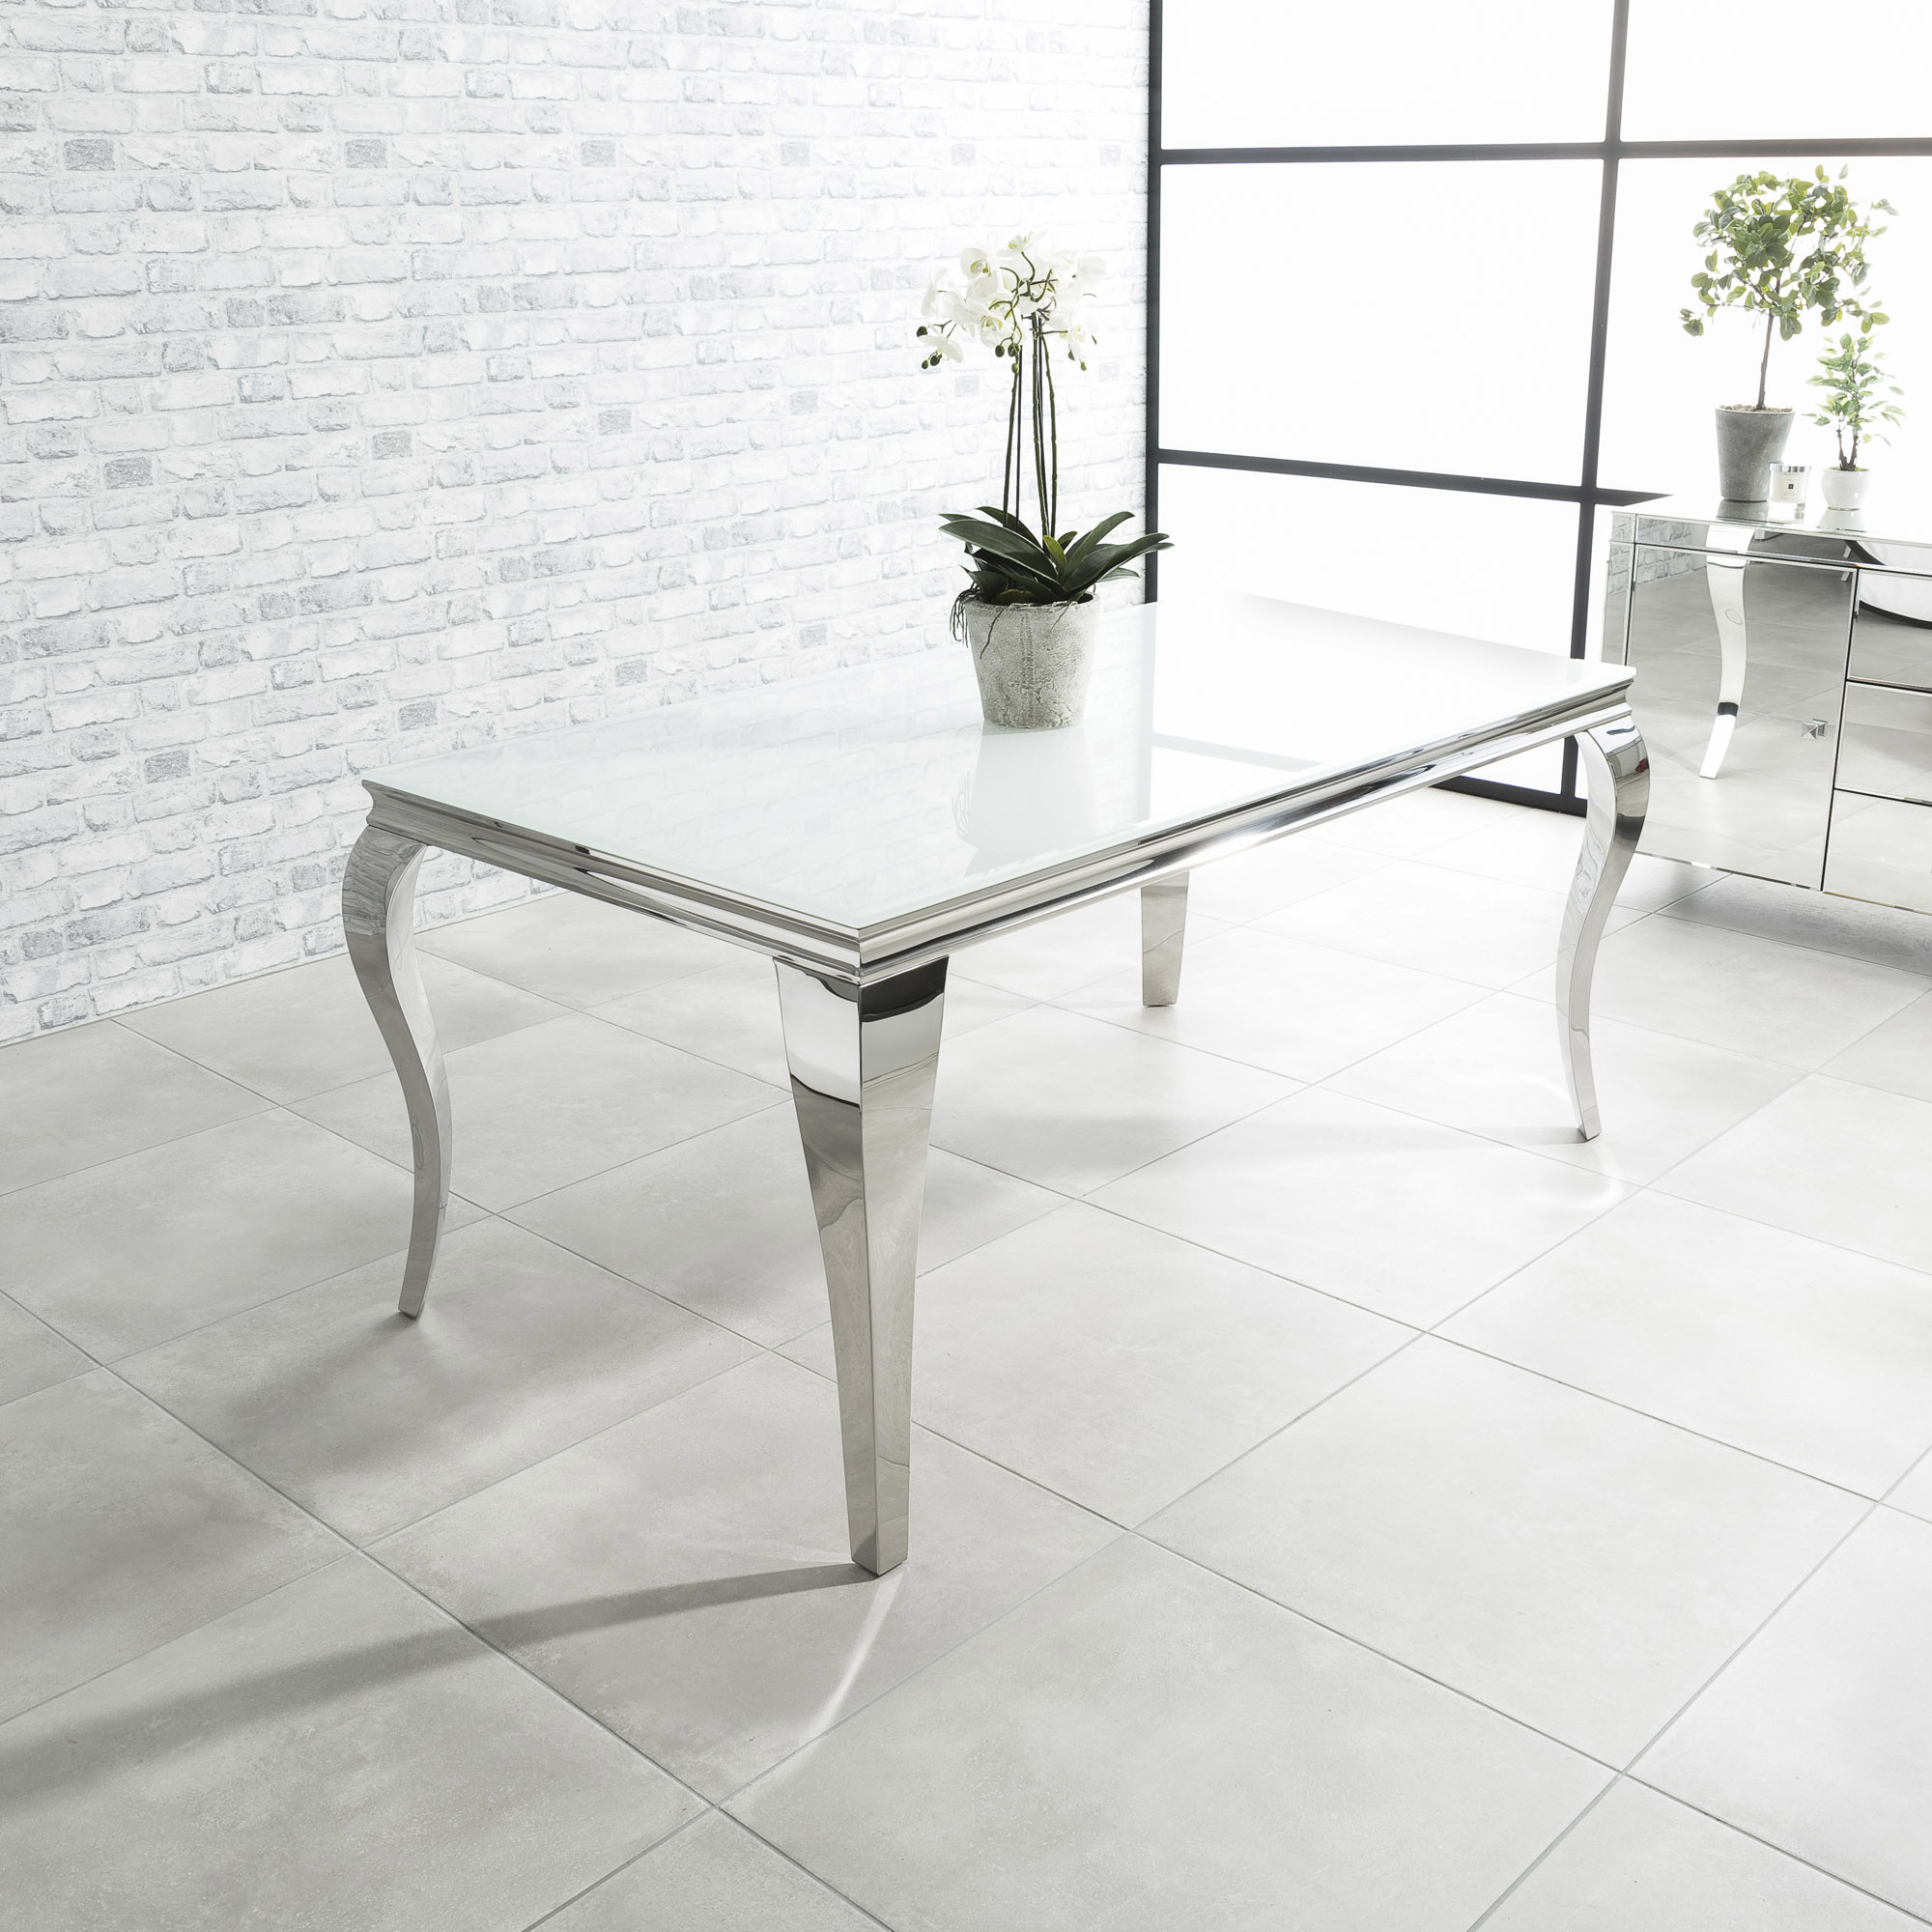 1.6m Louis Polished Steel & White Glass Dining Table Set with 4 Grey Brushed Velvet Dining Chairs